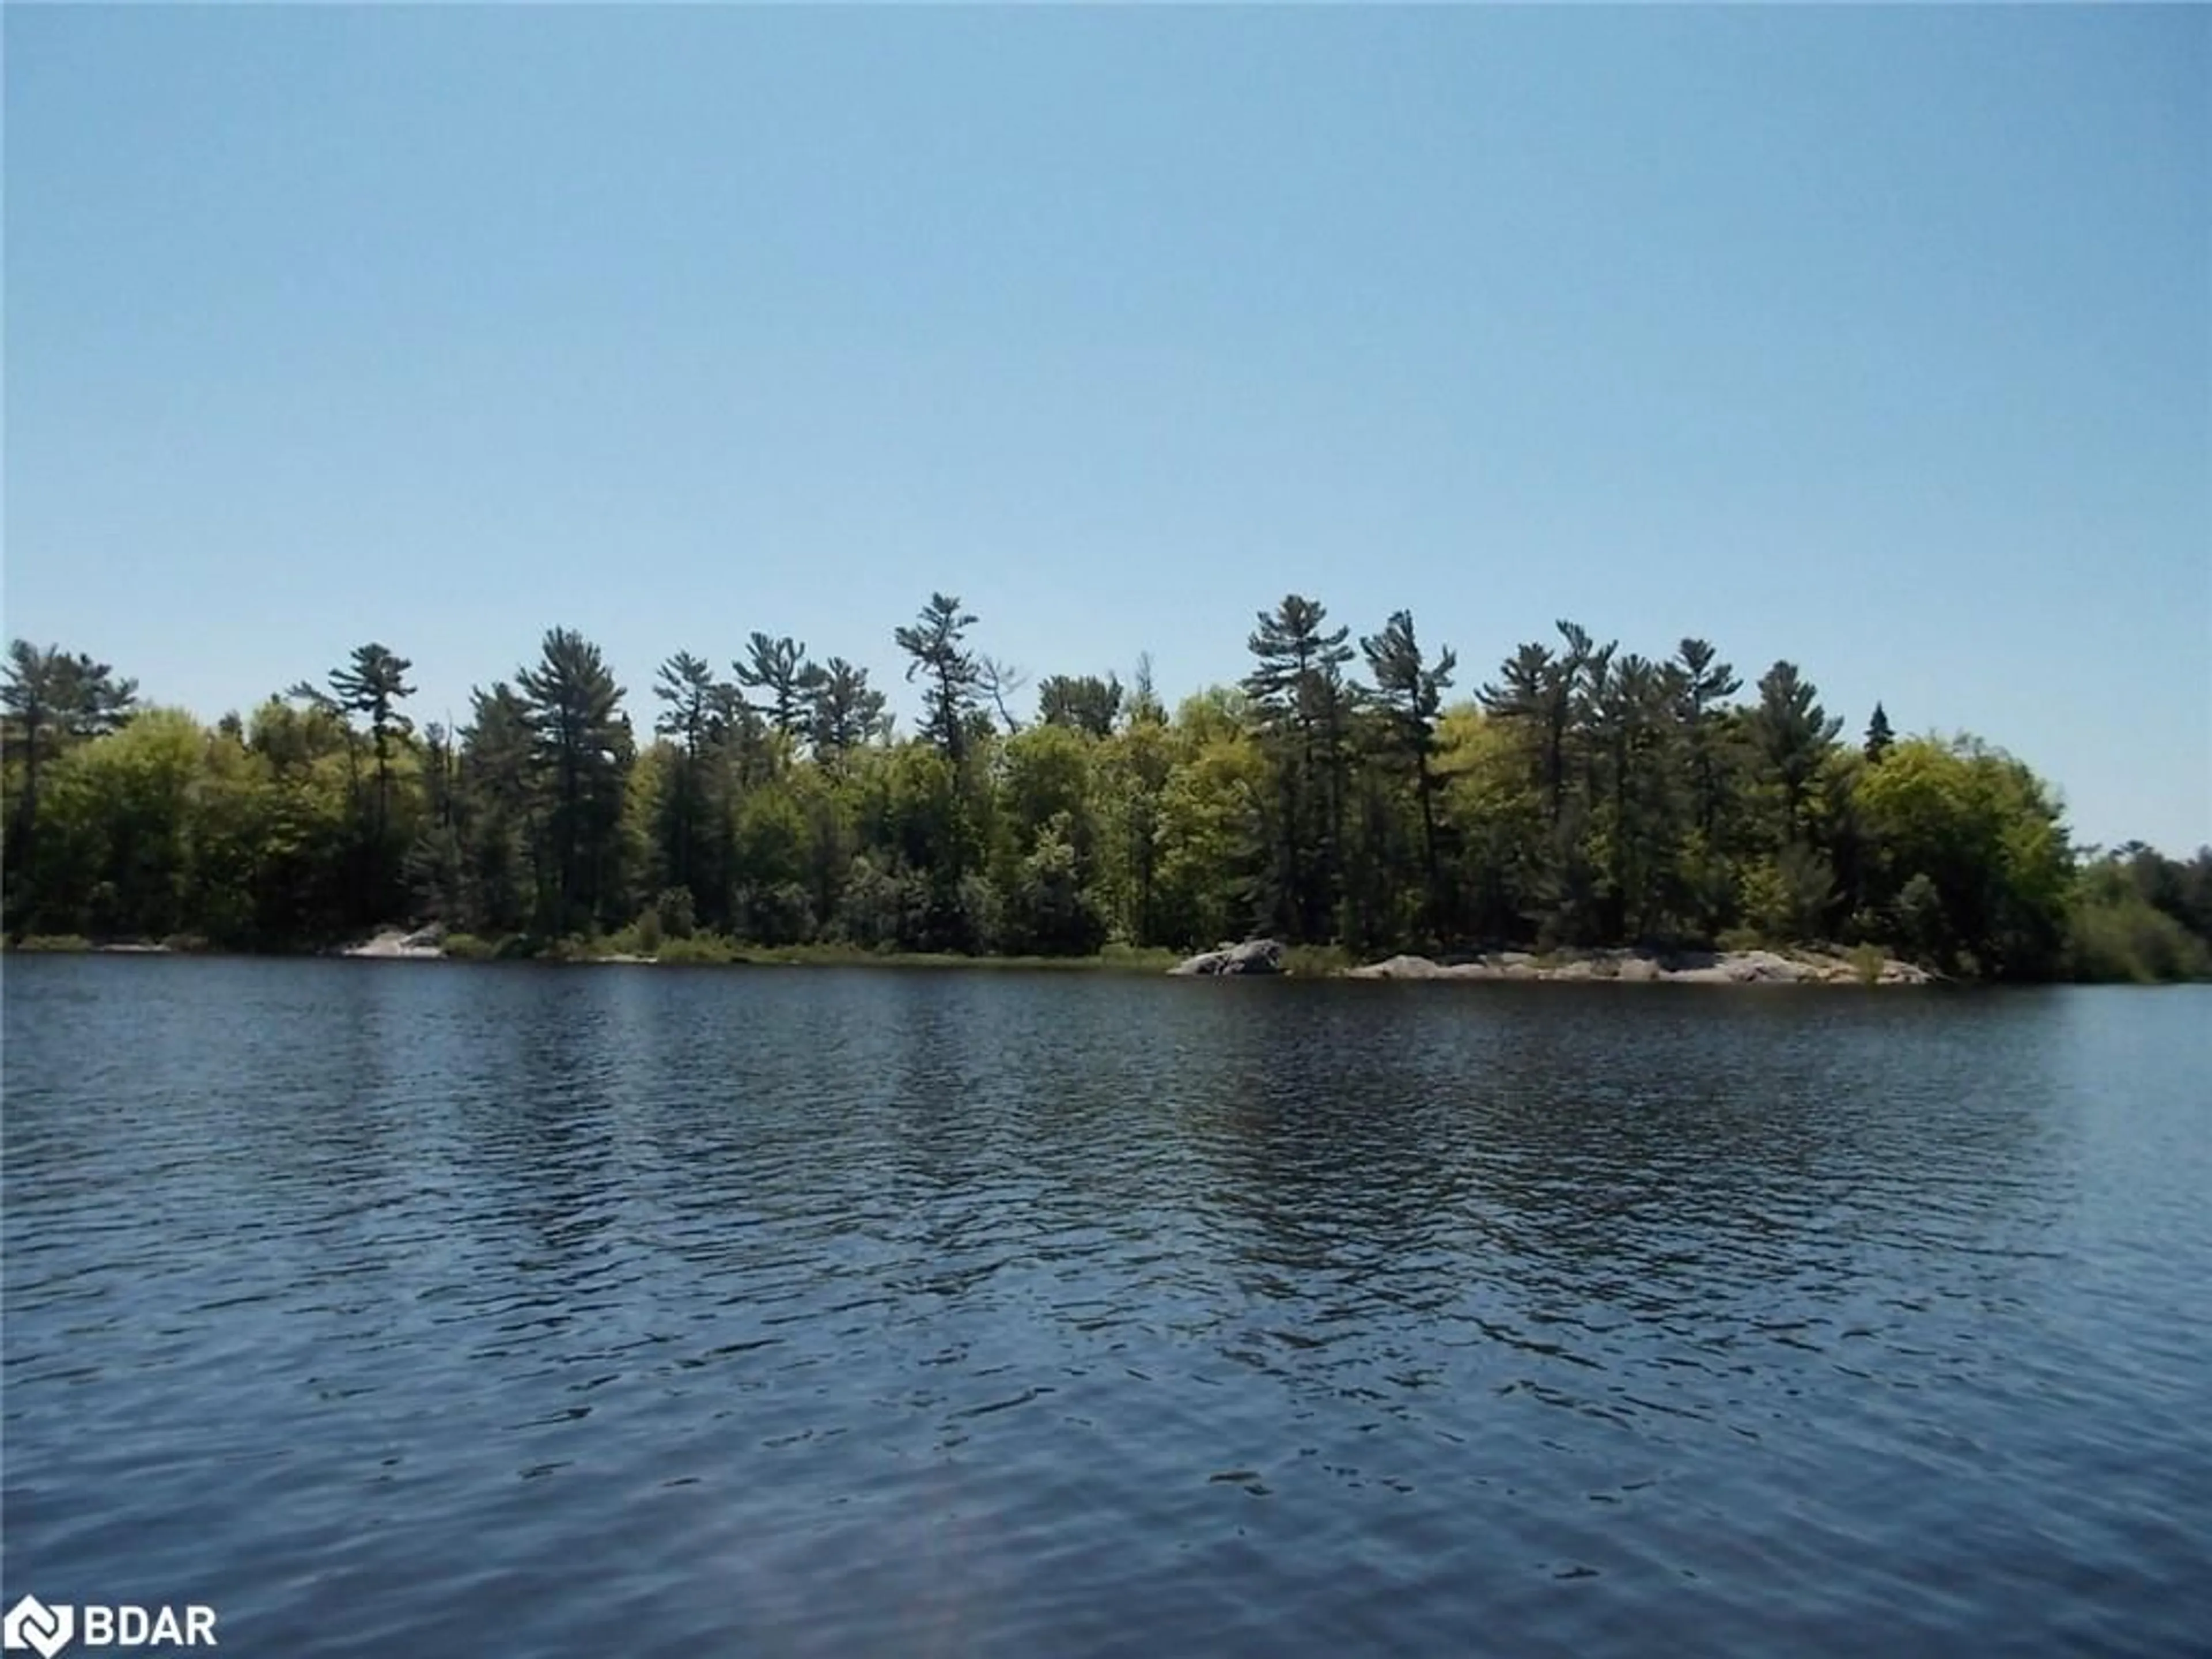 Lakeview for N/A Mcdiarmid Island, Pointe au Baril Ontario P0G 1K0